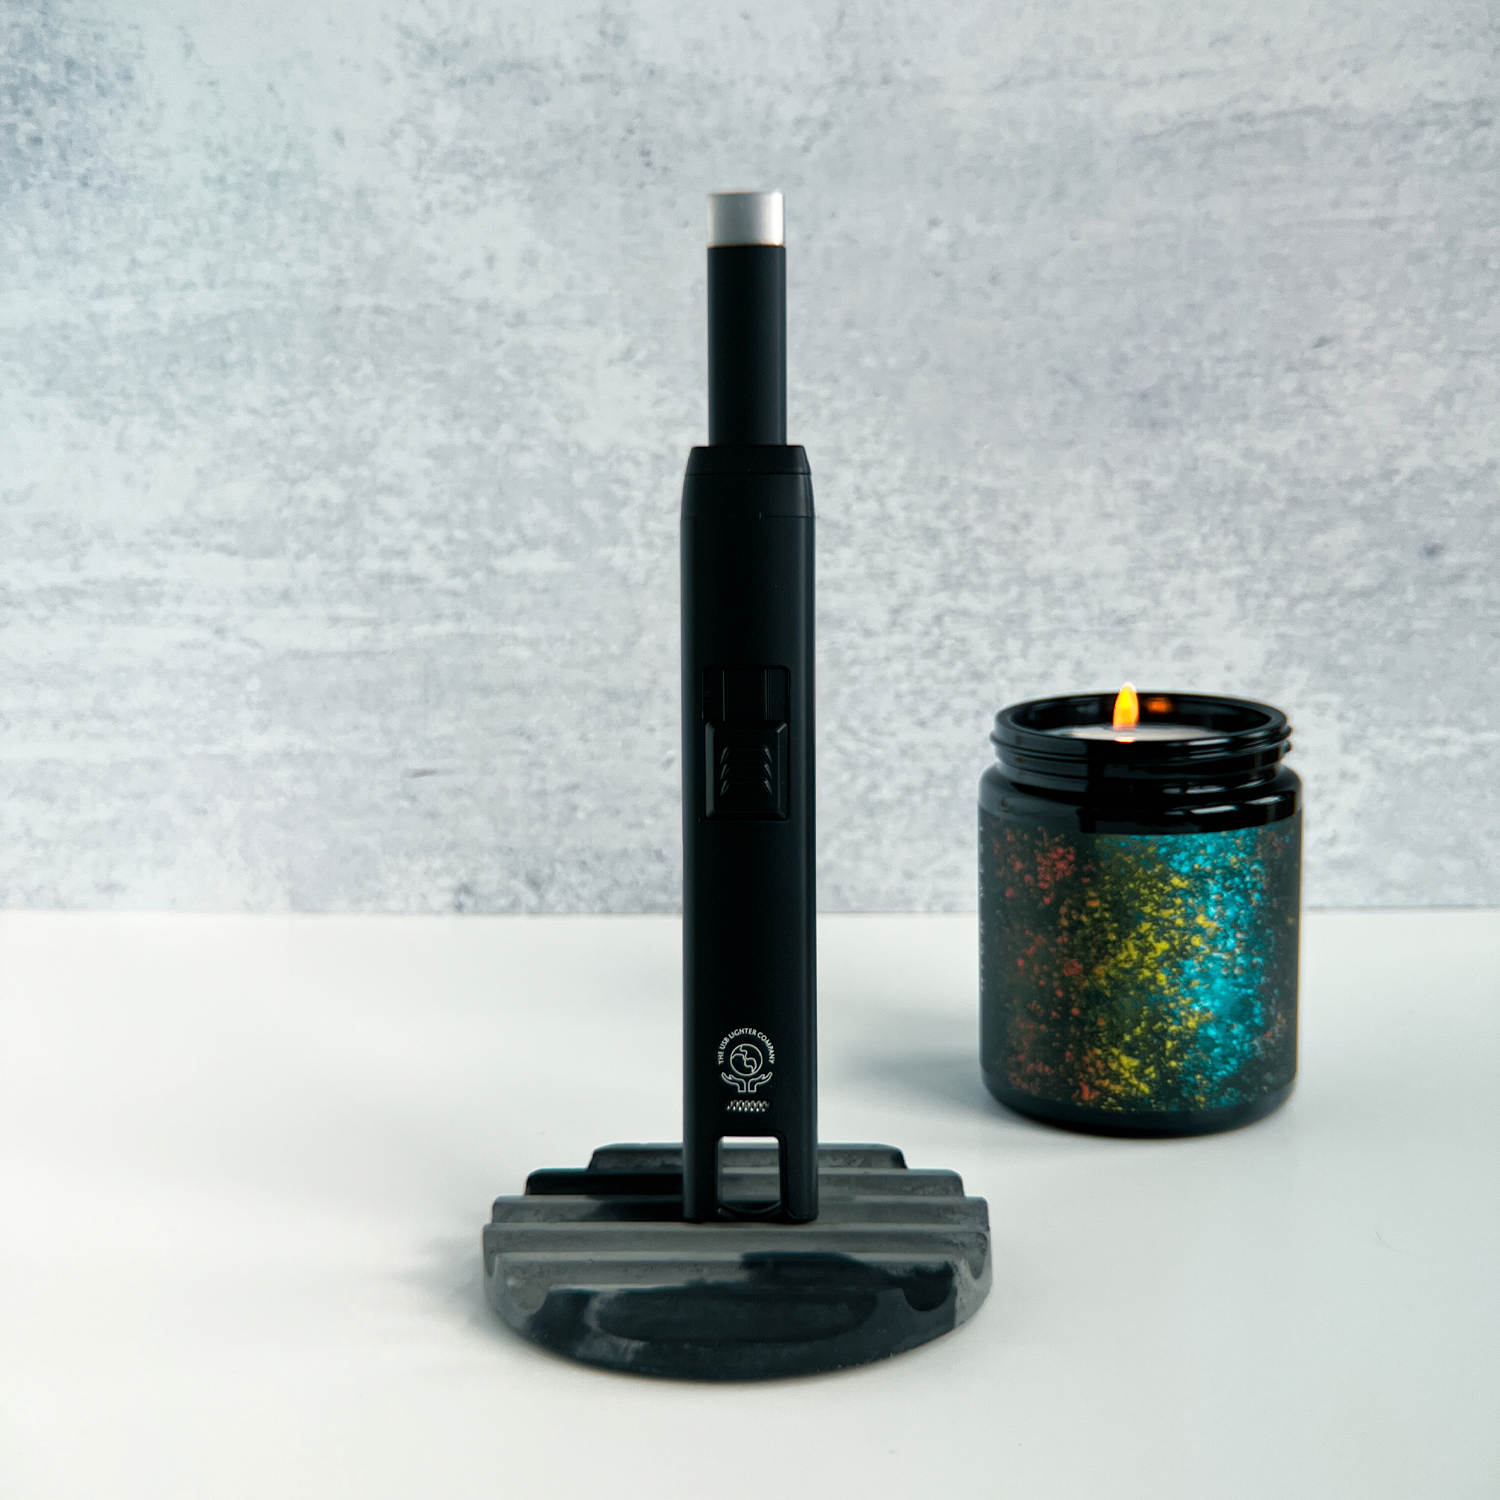 THE ARC Electric Candle Lighter Matte Black rechargeable & eco-friendly